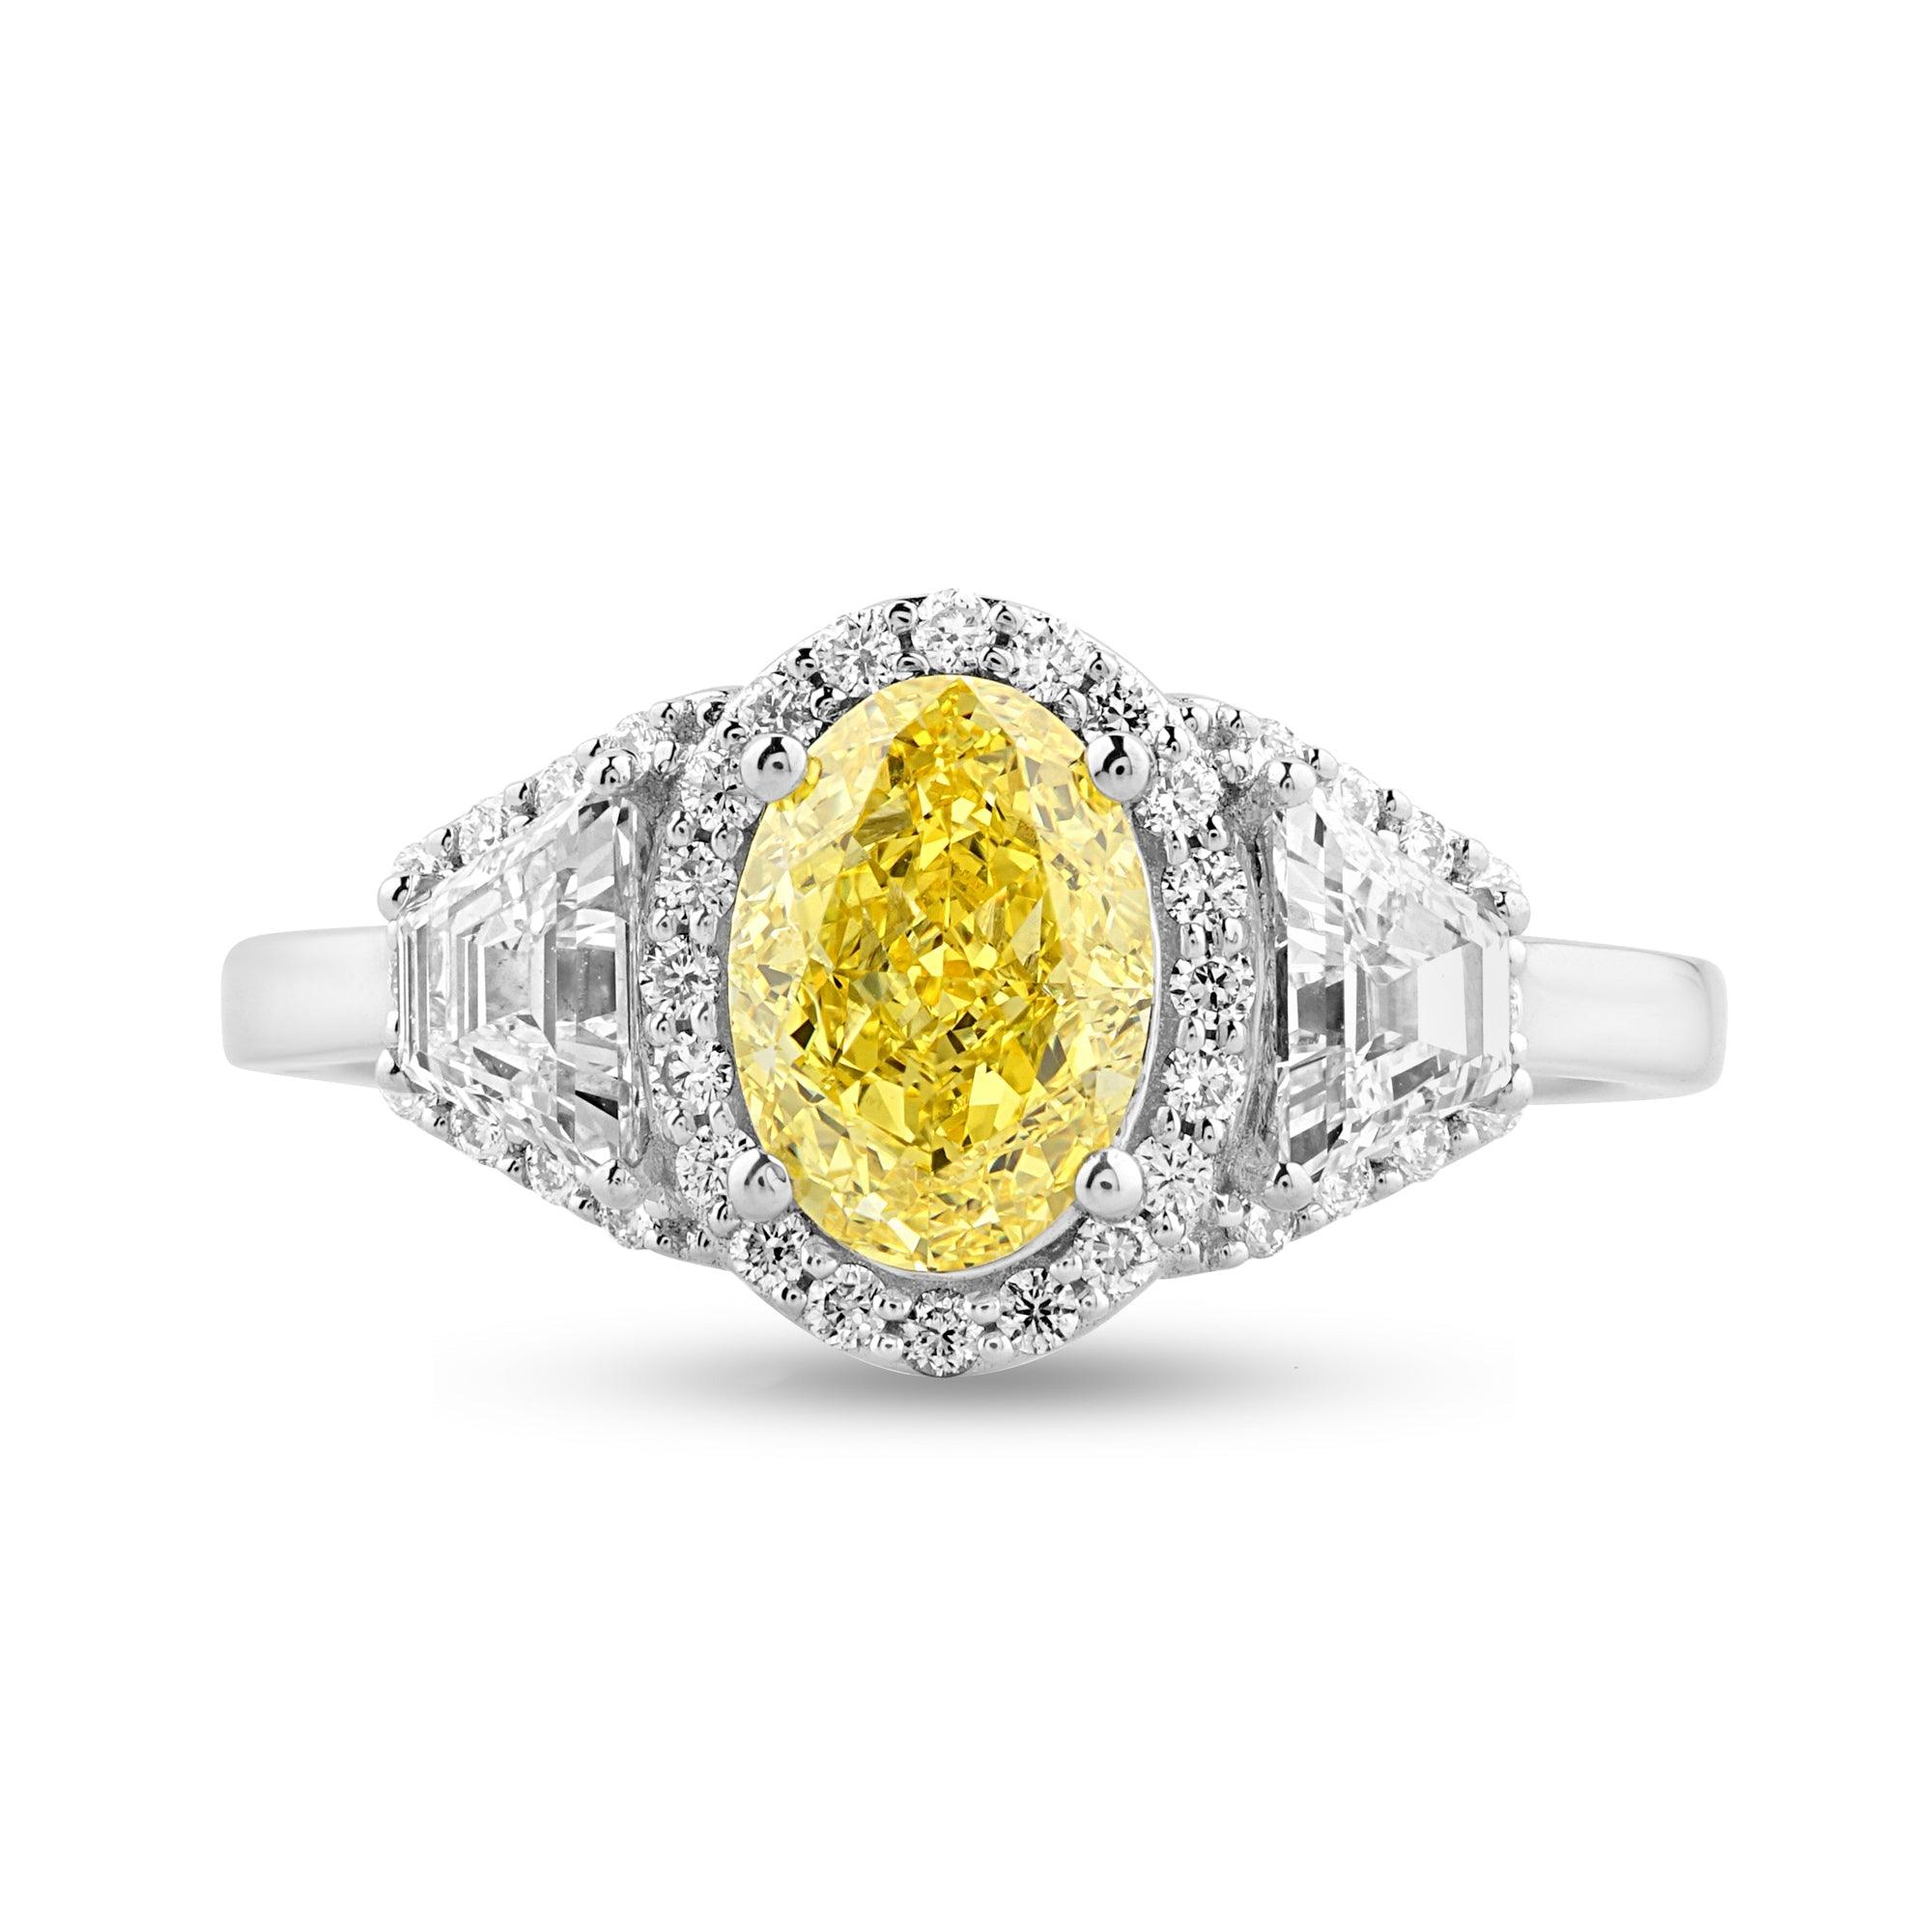 Moissanite Halo Ring with 1.24ct Oval Yellow Center Stone - Harmony Bound